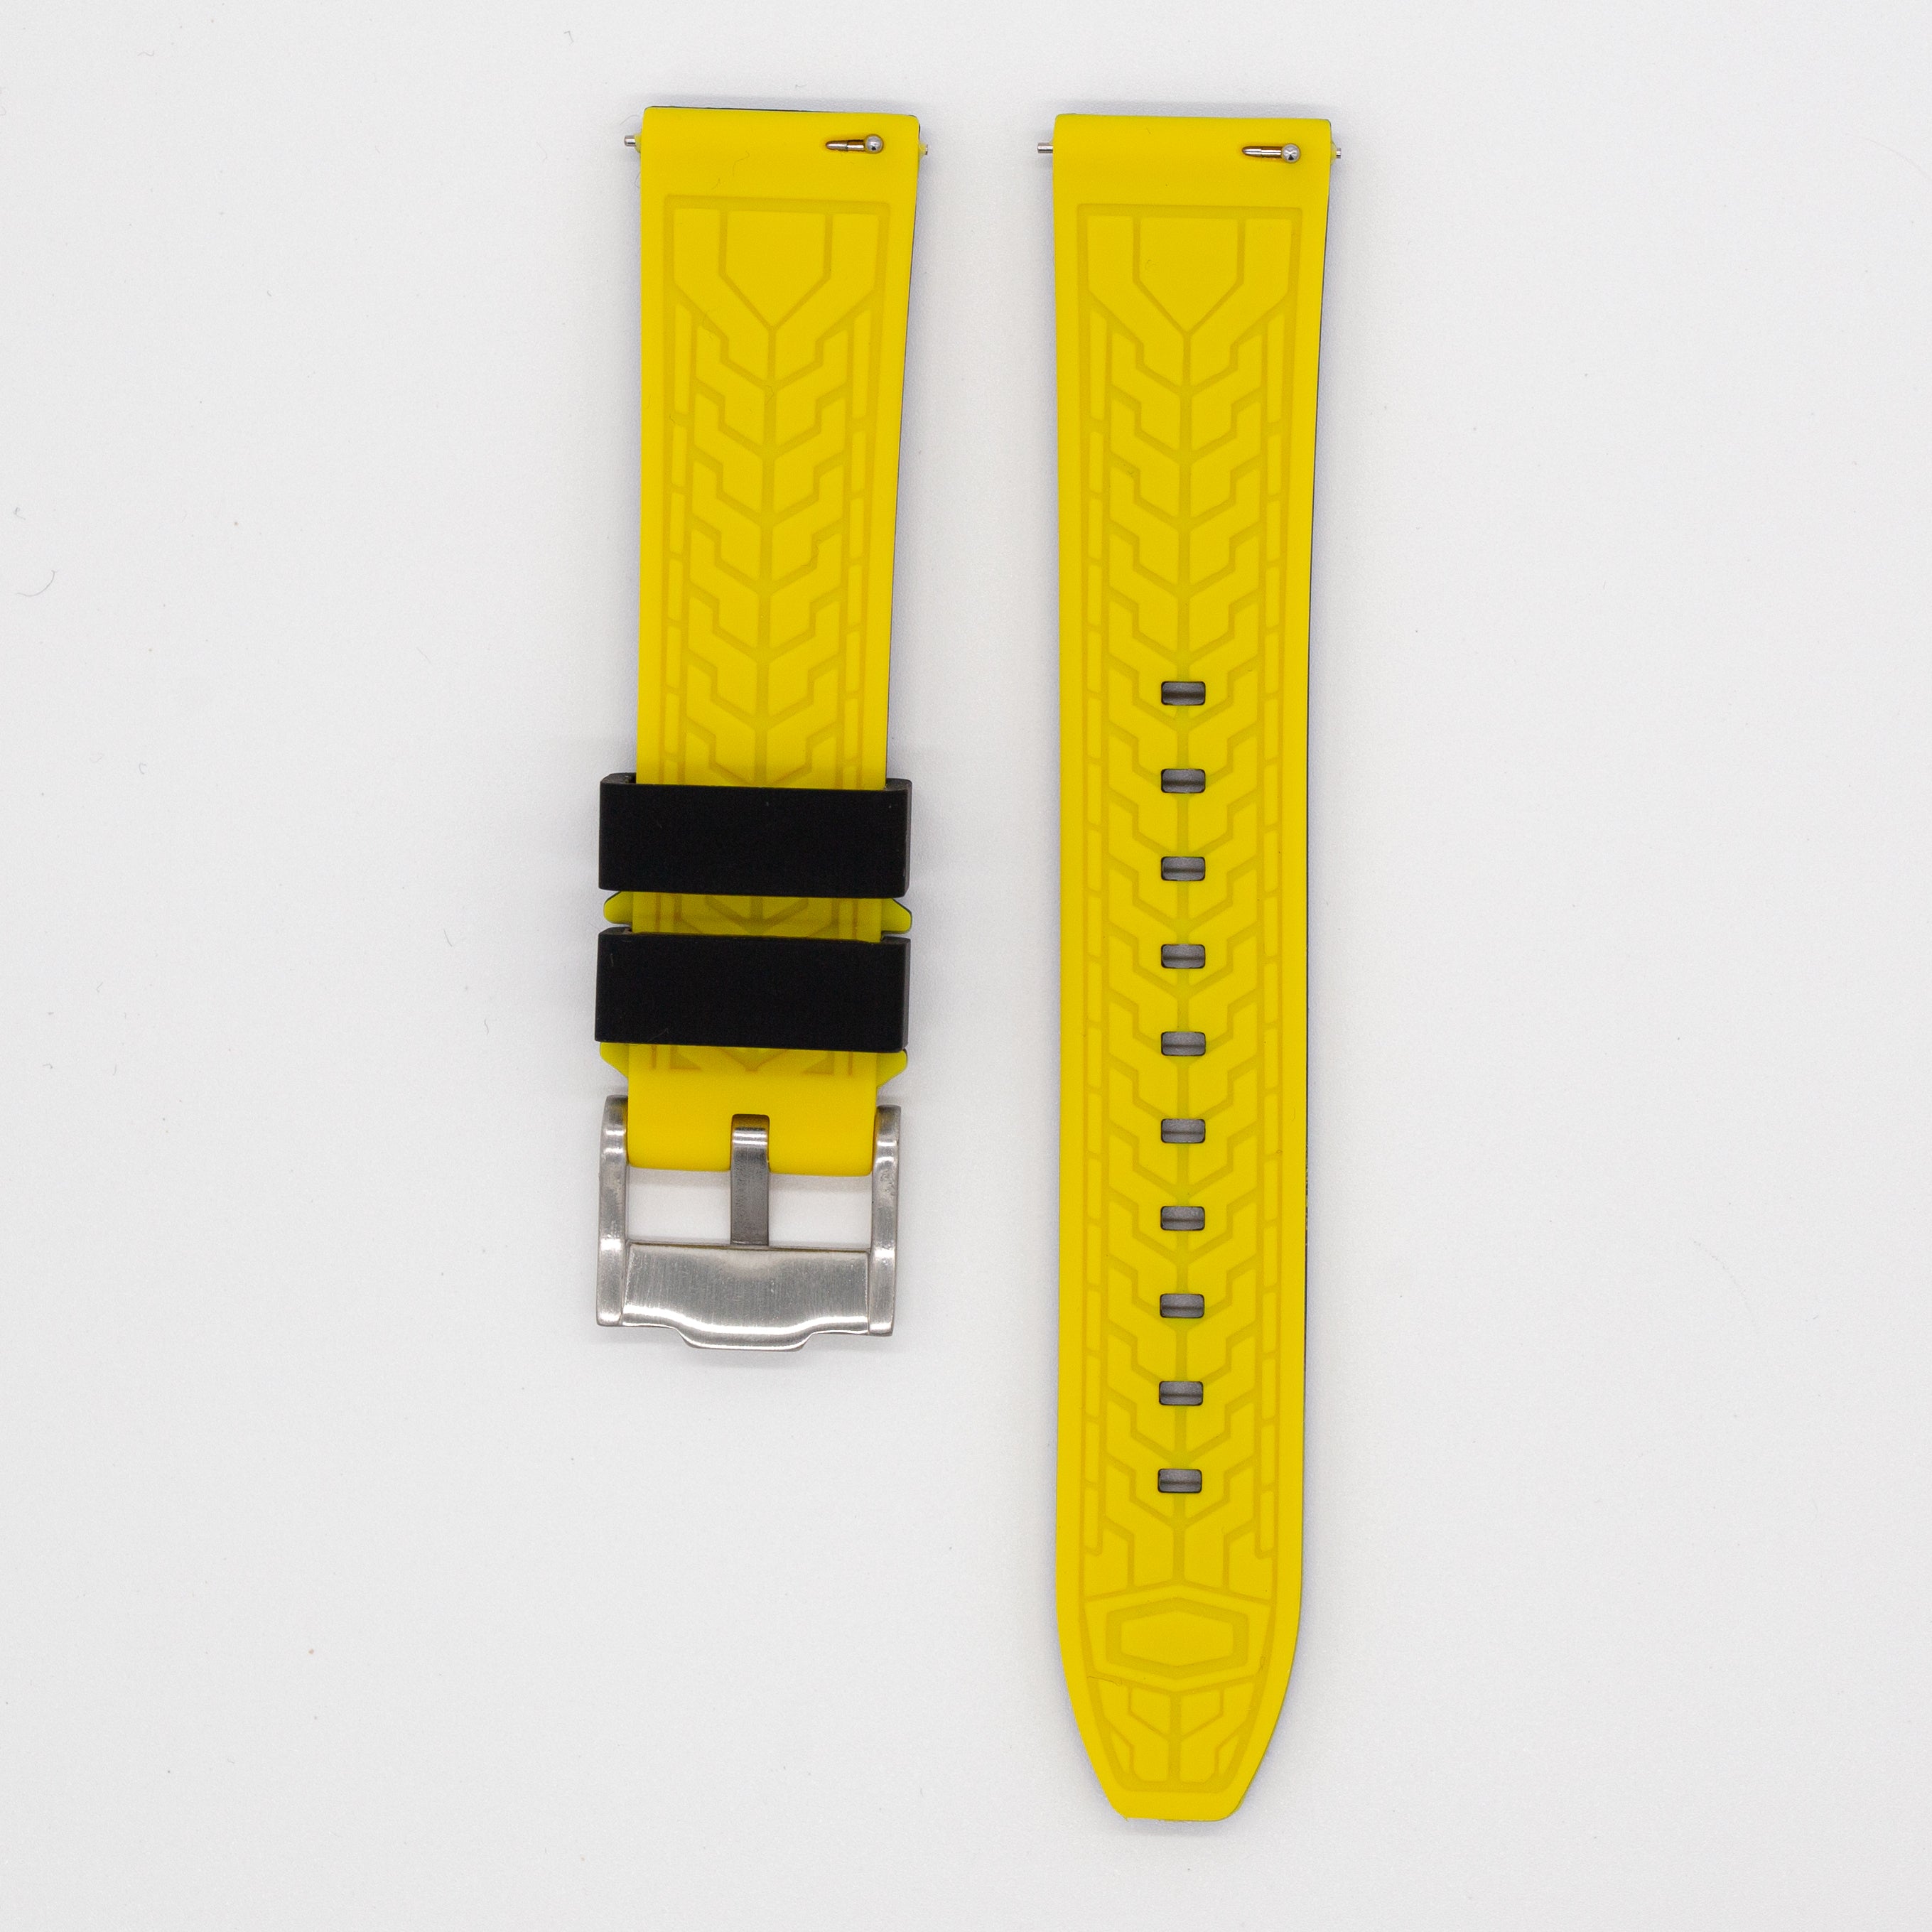 MoonSwatch Outline Strap Black with Yellow Outline